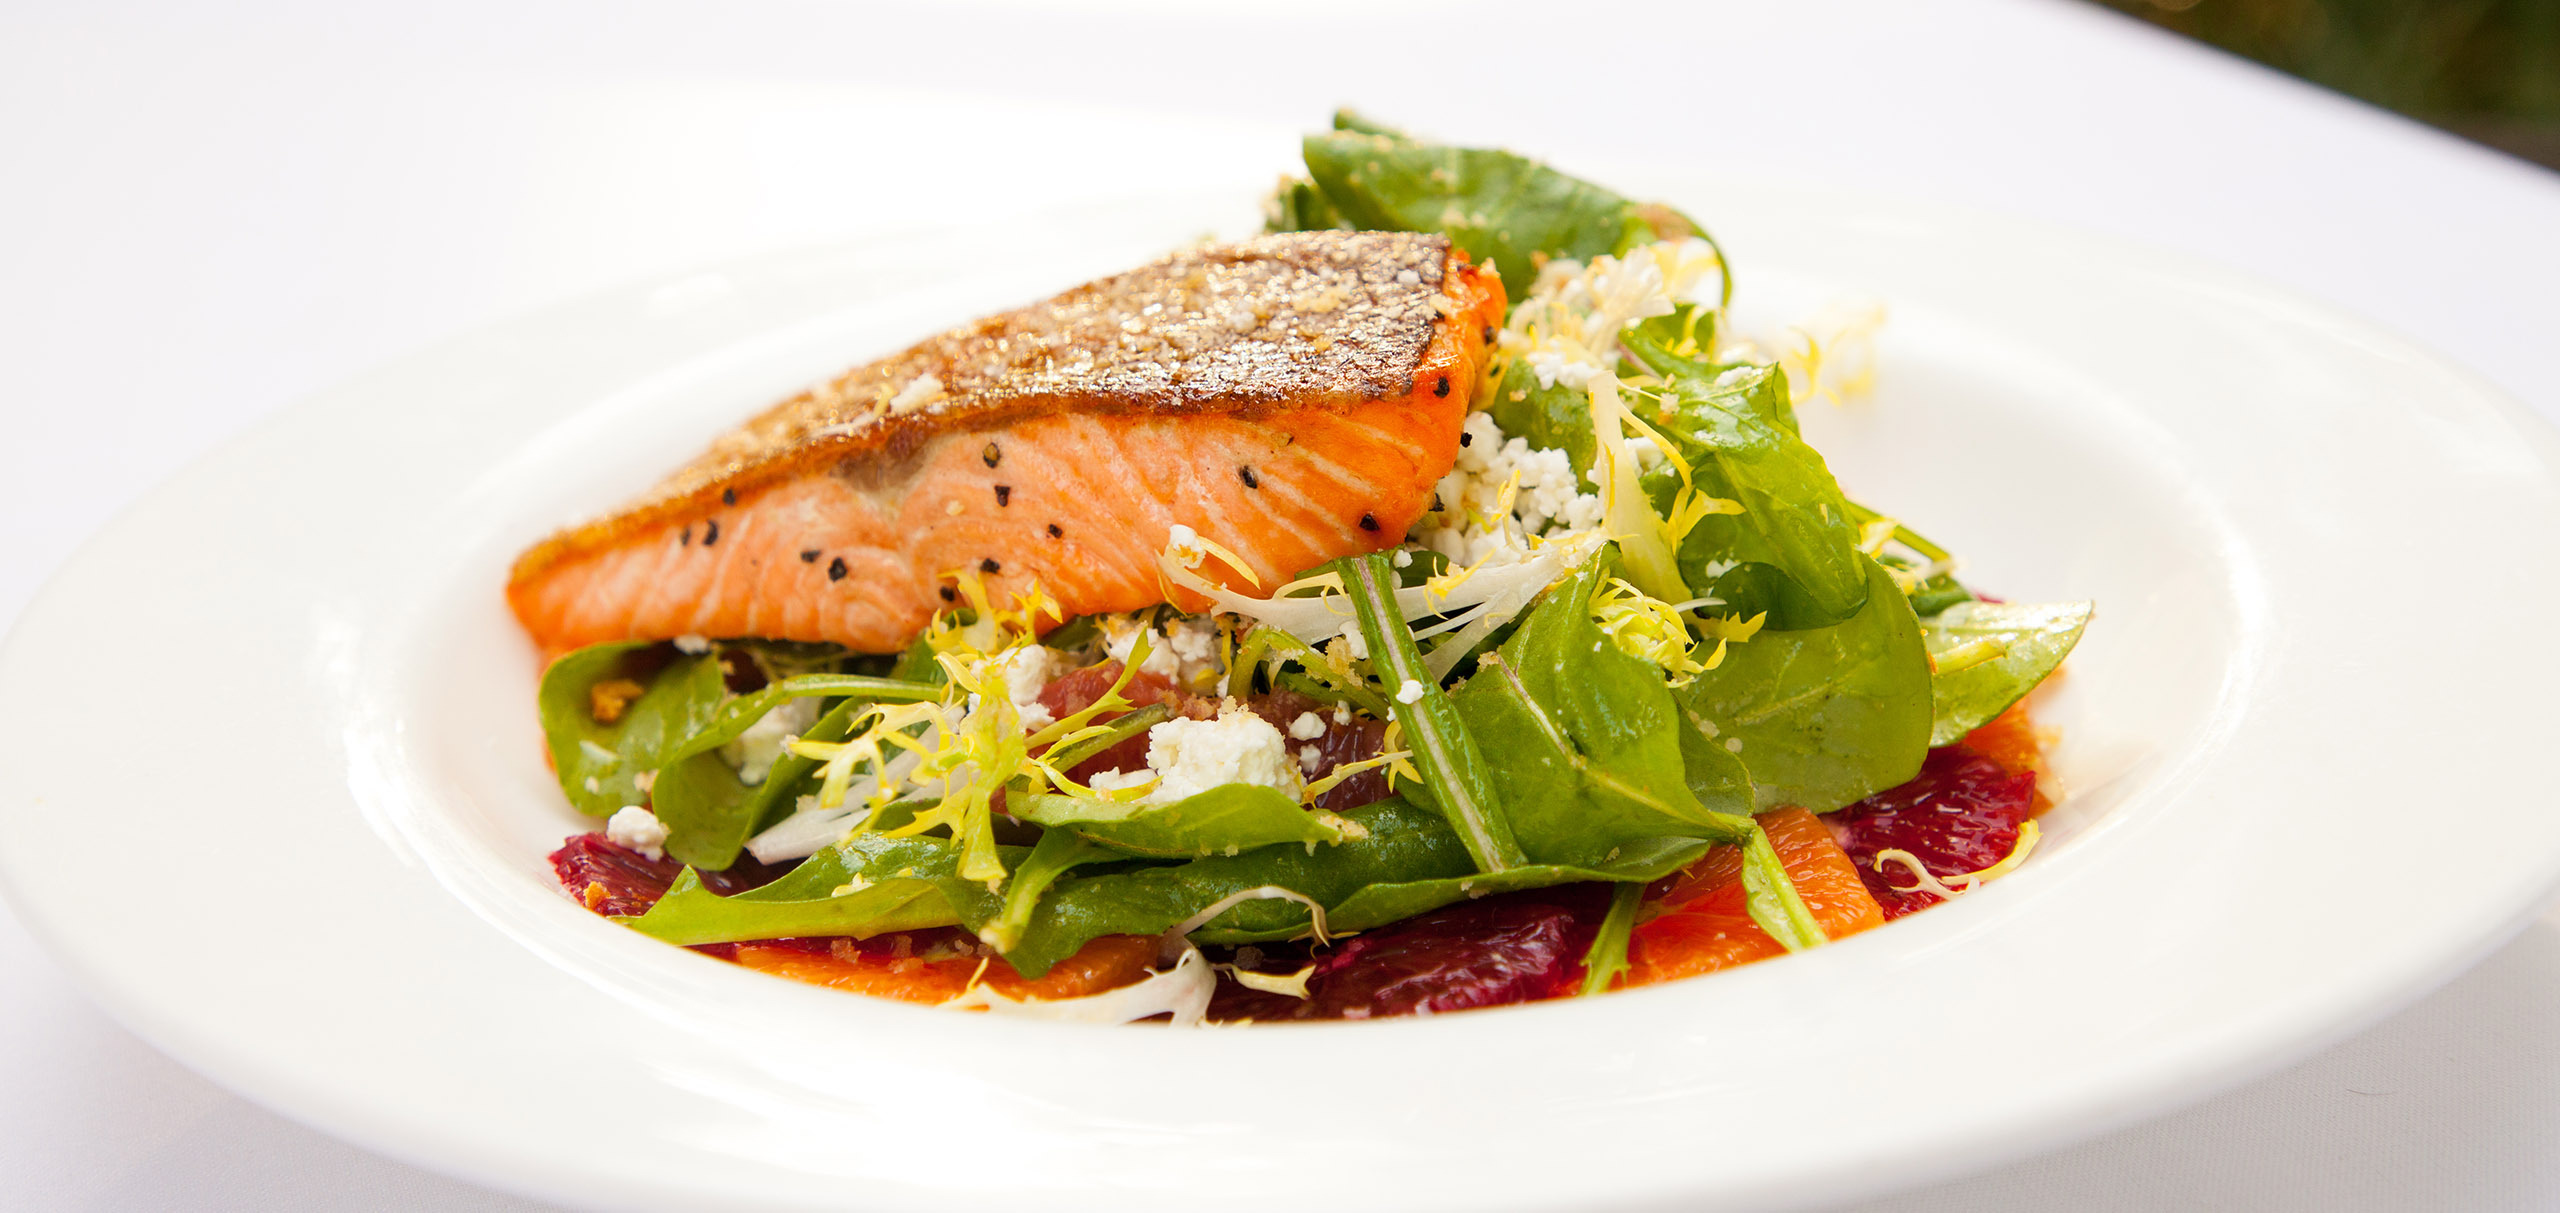 Photo of grilled salmon on top of a green salad with balsamic dressing on a white plate.